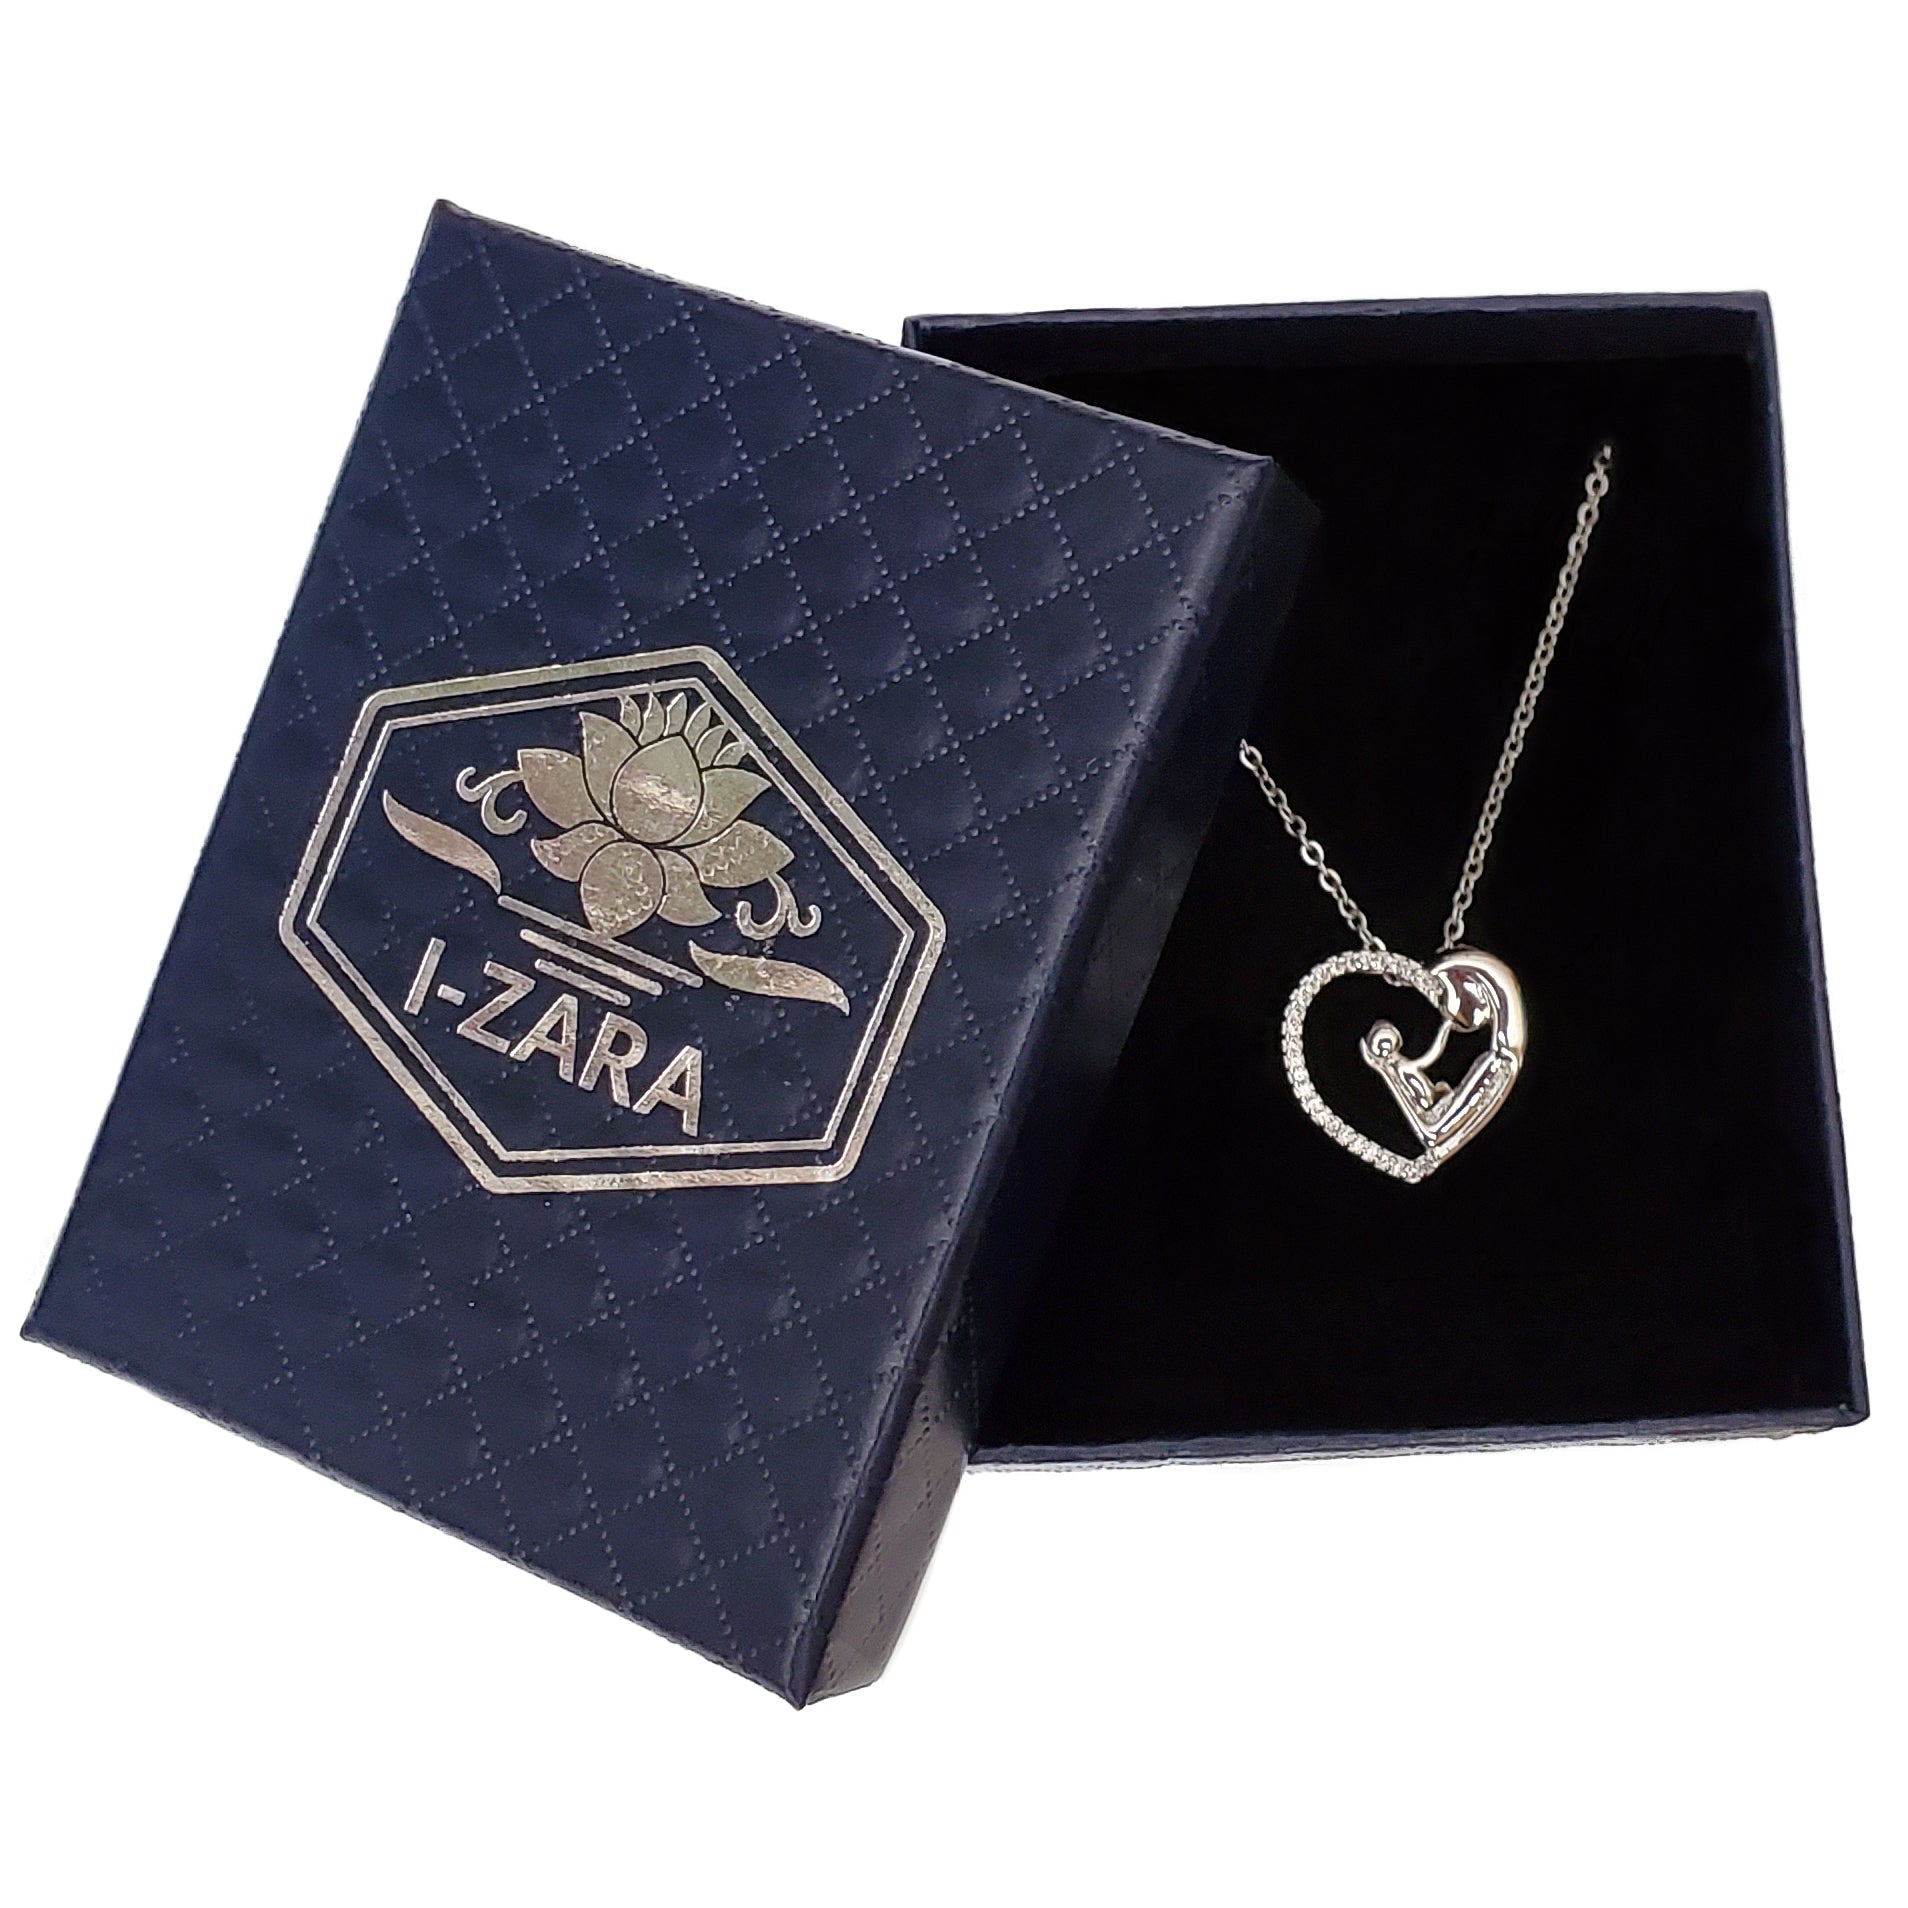 Best Great Quality Classic Mother and Child Heart Pendant Necklace